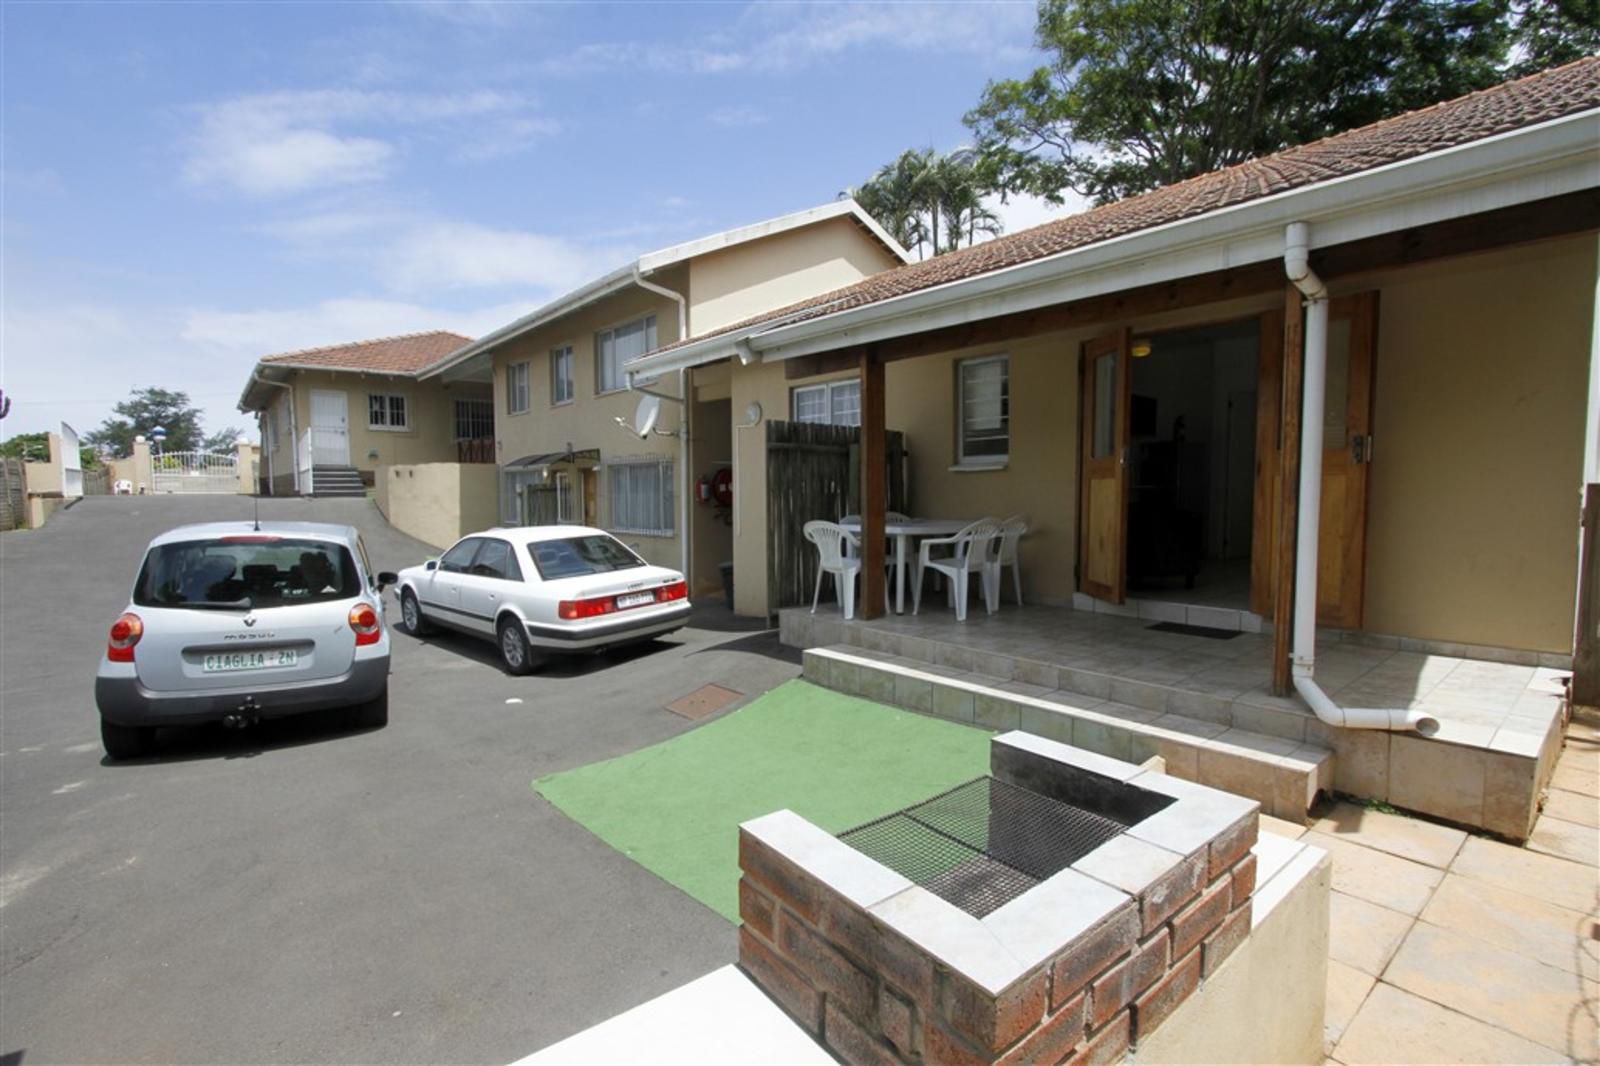 Clinch Self Catering Durban North Durban Kwazulu Natal South Africa House, Building, Architecture, Car, Vehicle